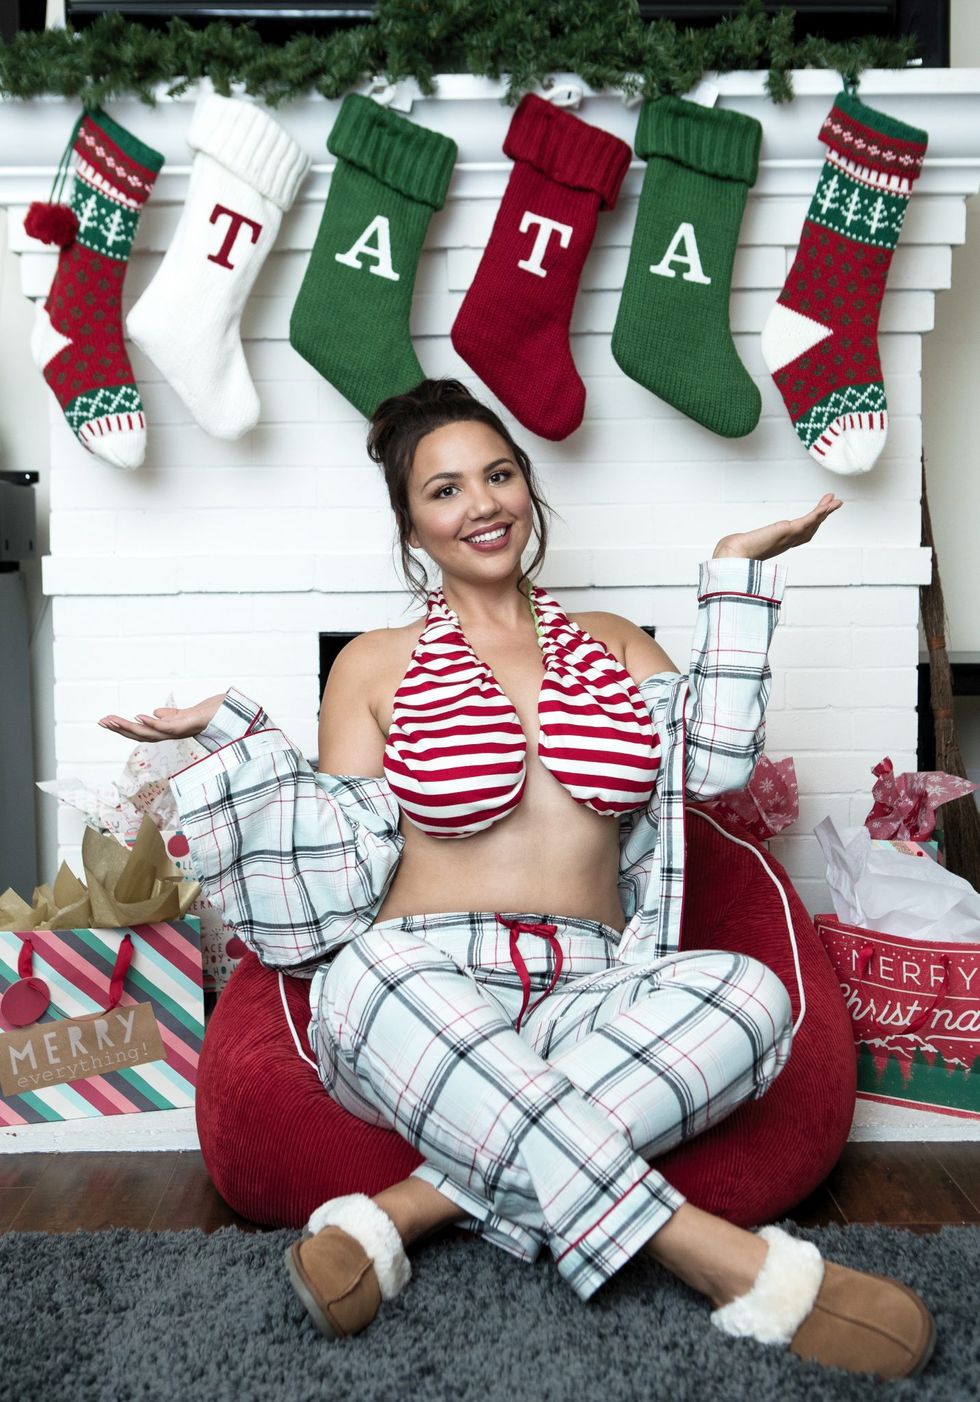 It Was Only a Matter of Time Before Holiday Season Ta-Ta Towels Were a Thing